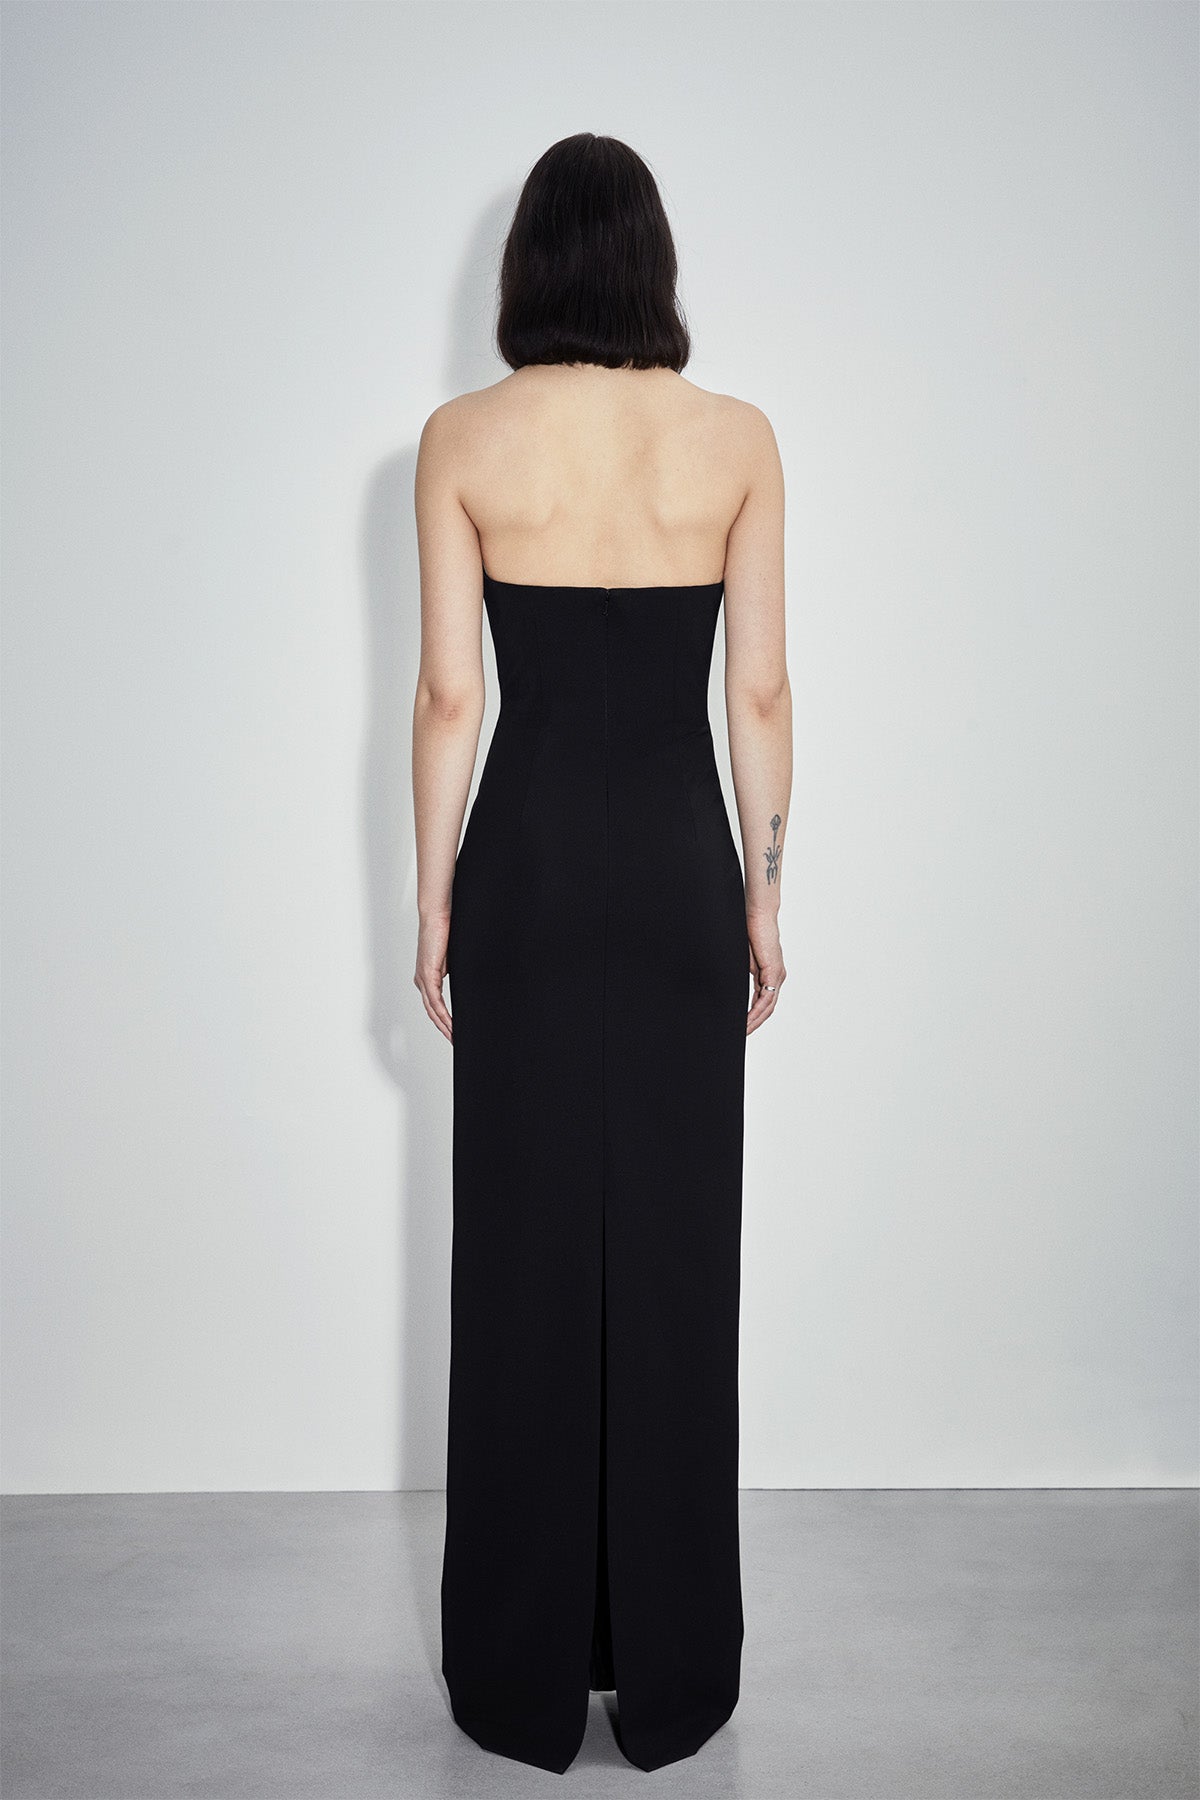 THE CAROLINE GOWN